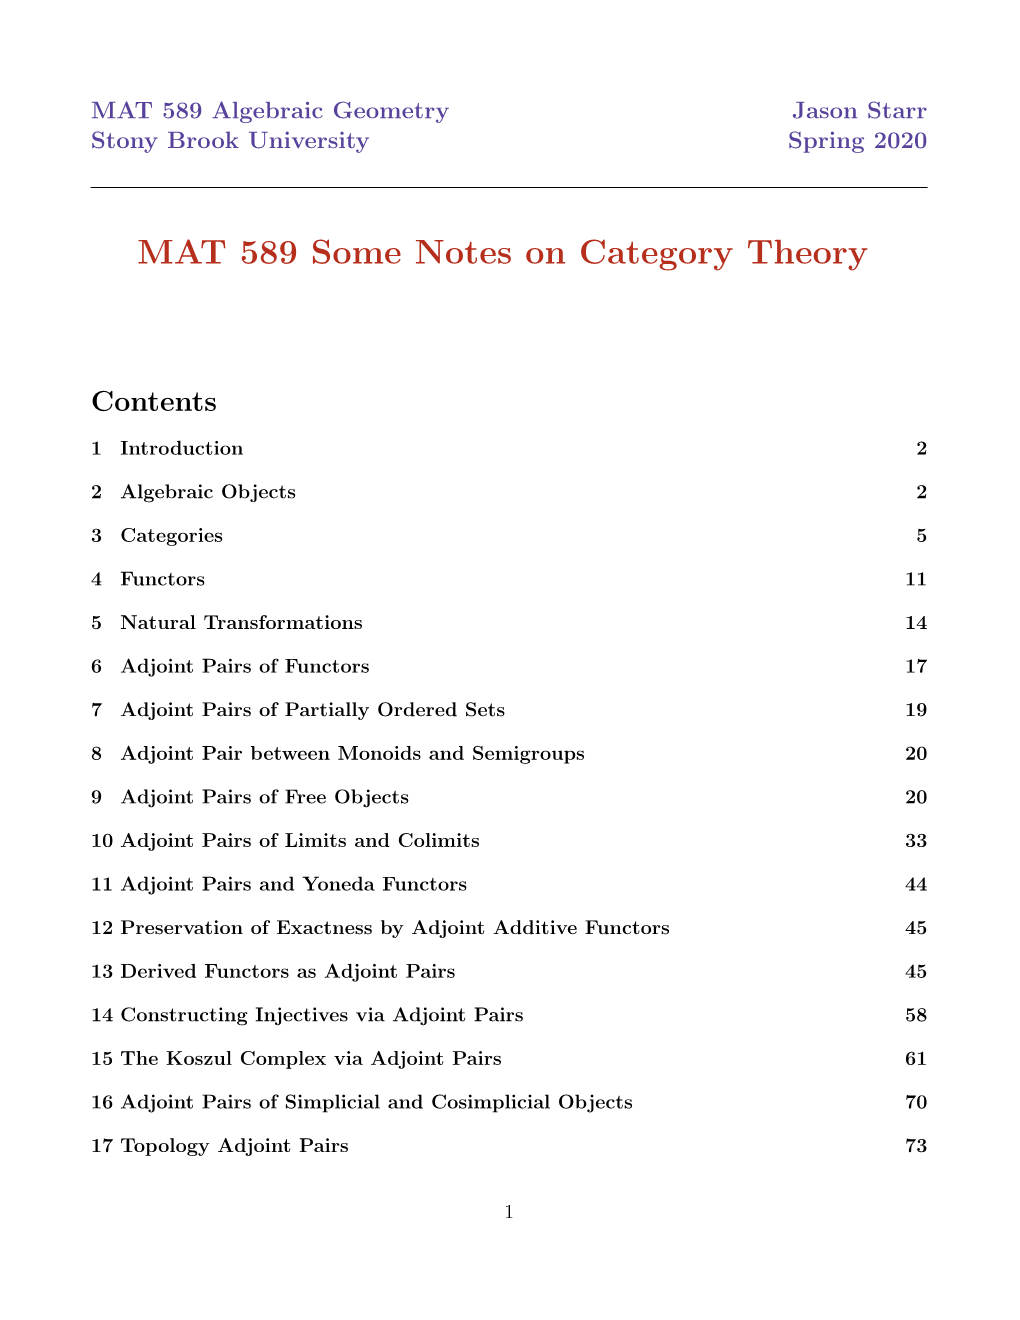 MAT 589 Some Notes on Category Theory